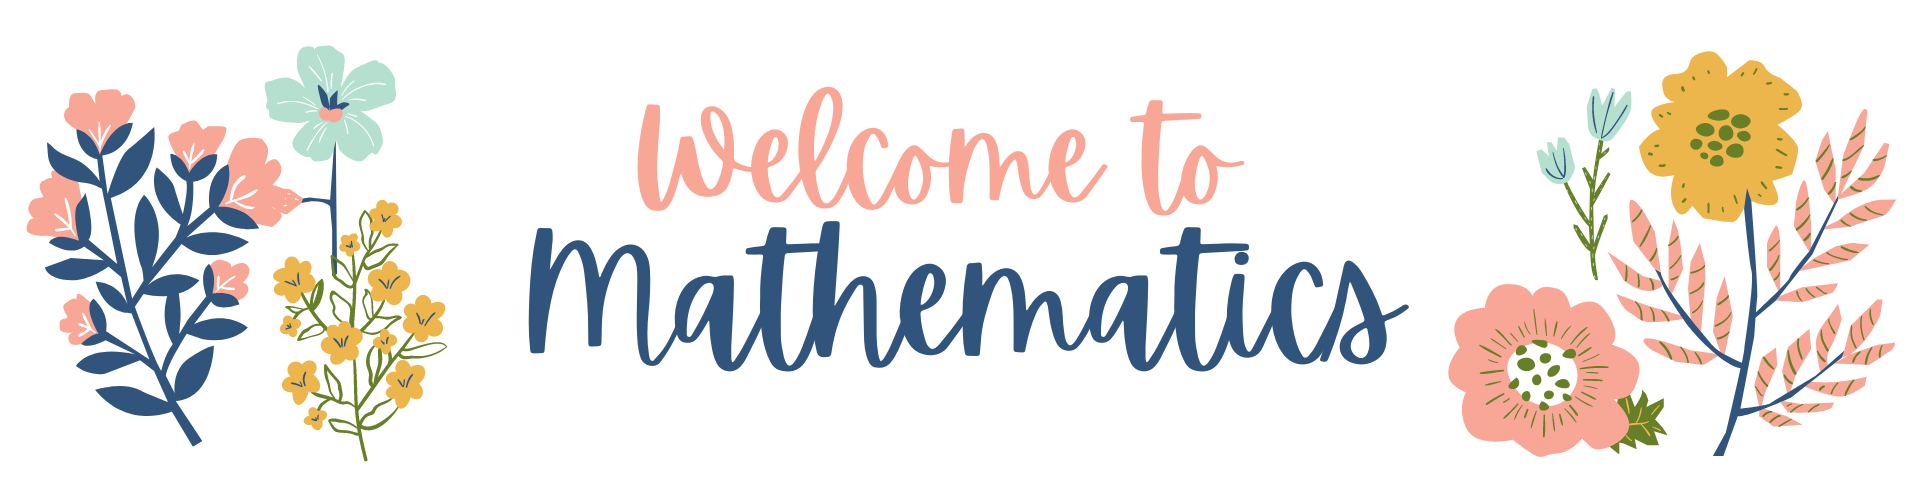 Welcome to Mathematics Google Classroom Header.png